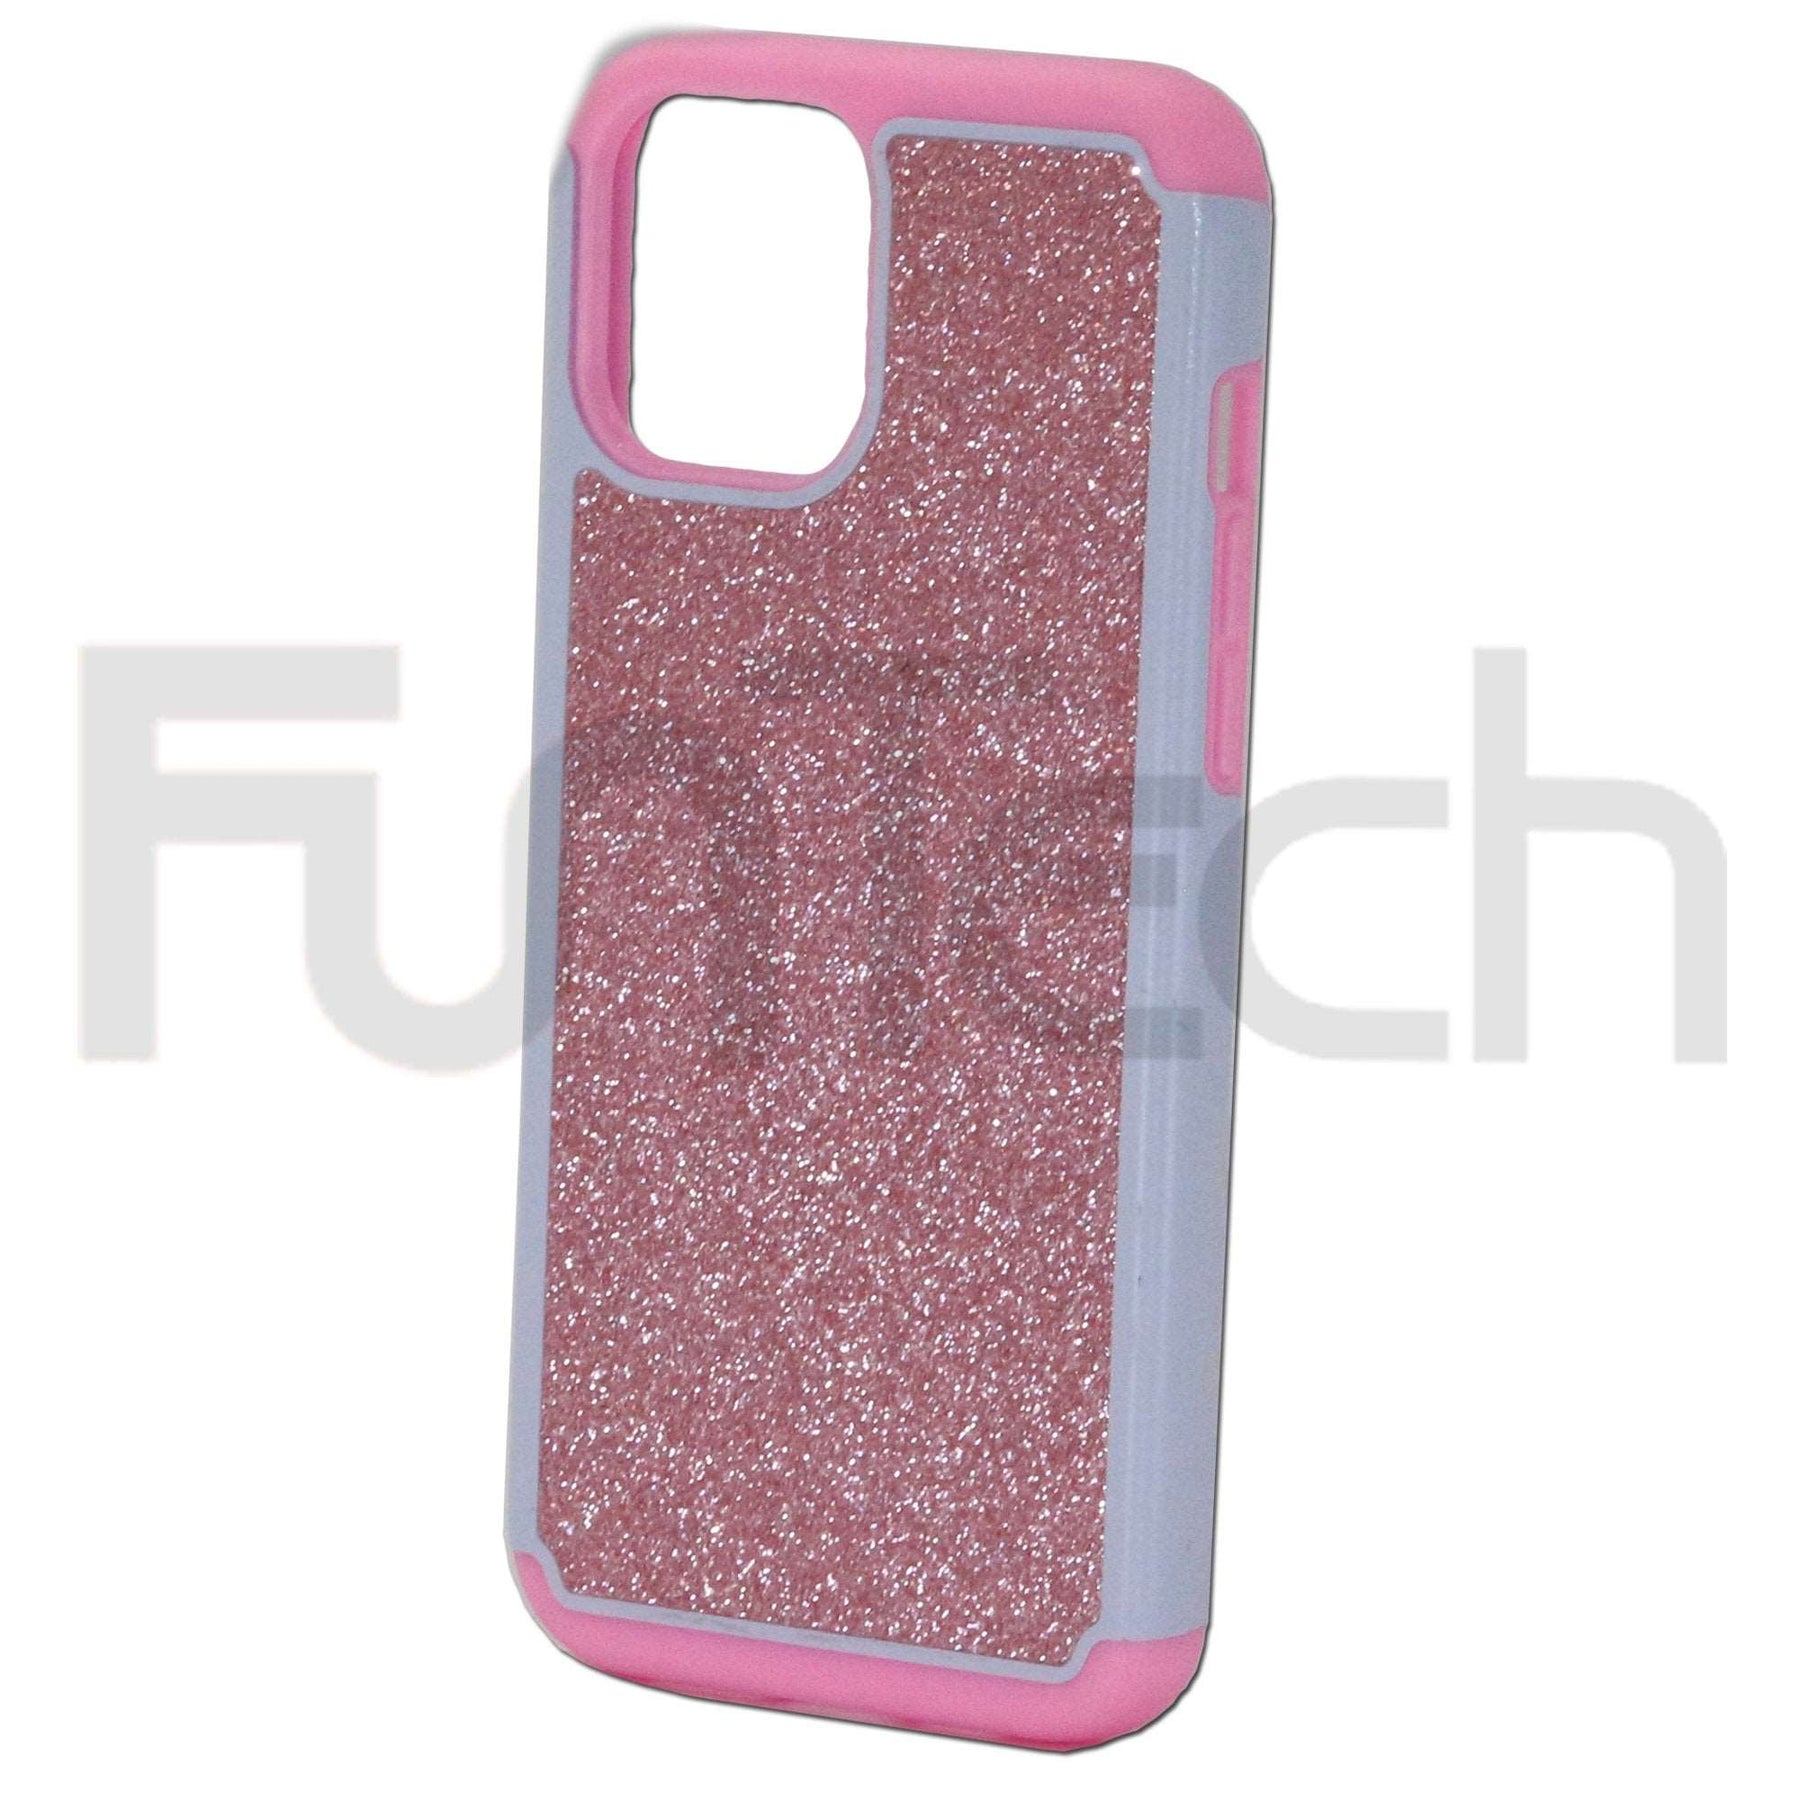 Apple iPhone 12 Pro Max Case Pink